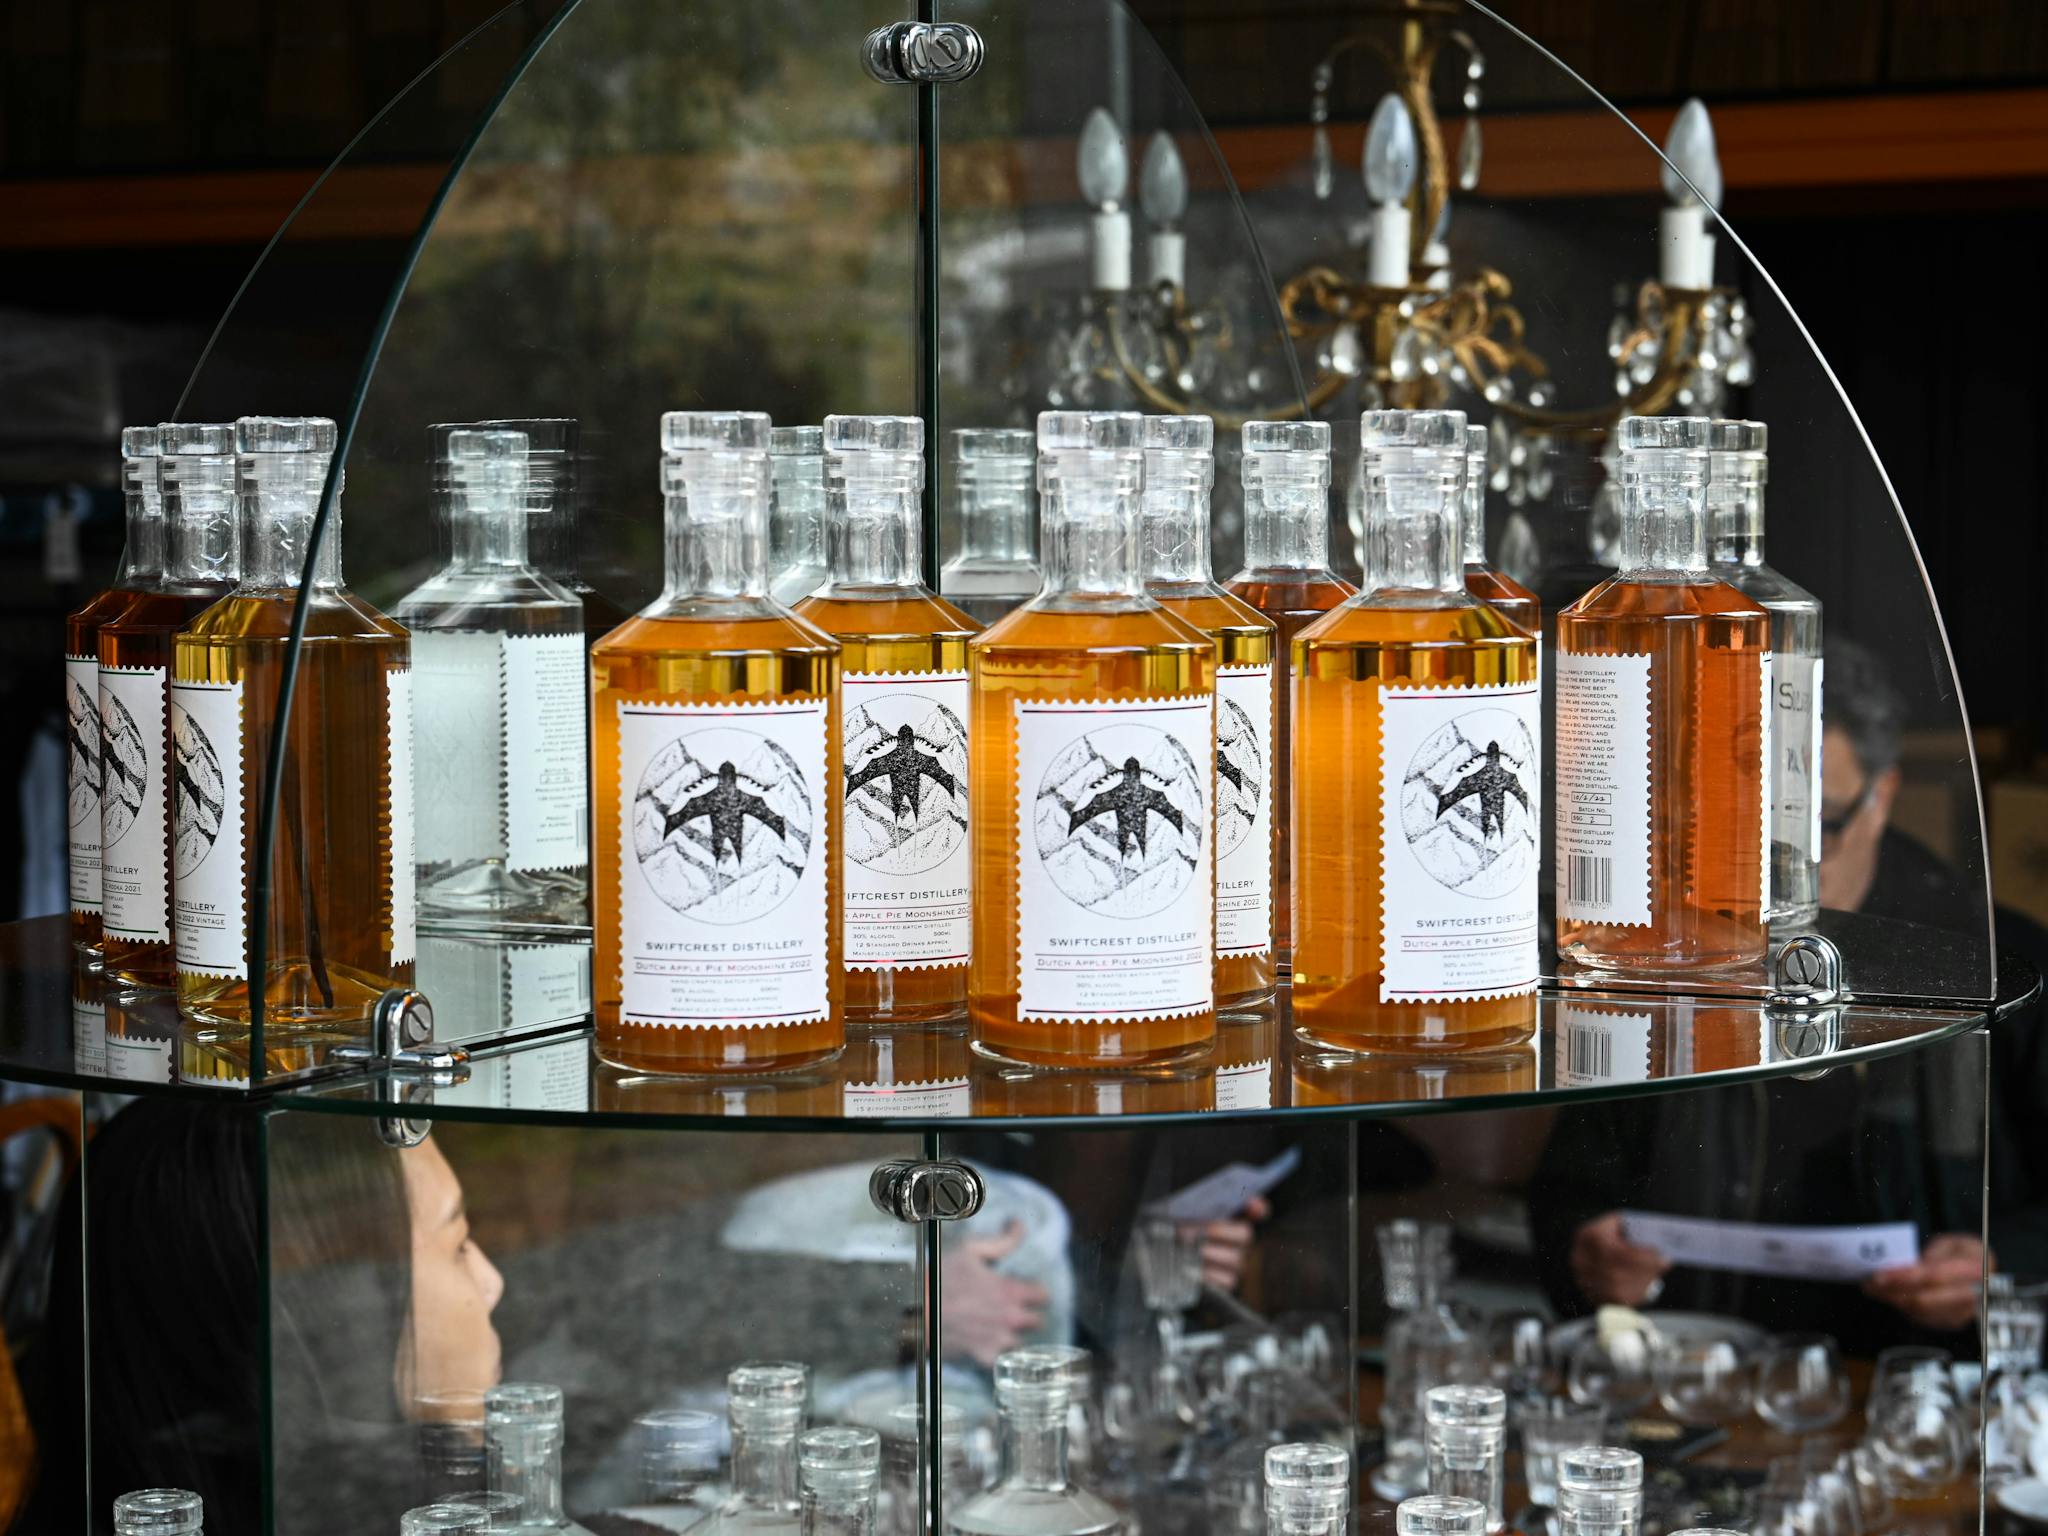 Collection of spirits for sale at Swiftcrest Distillery